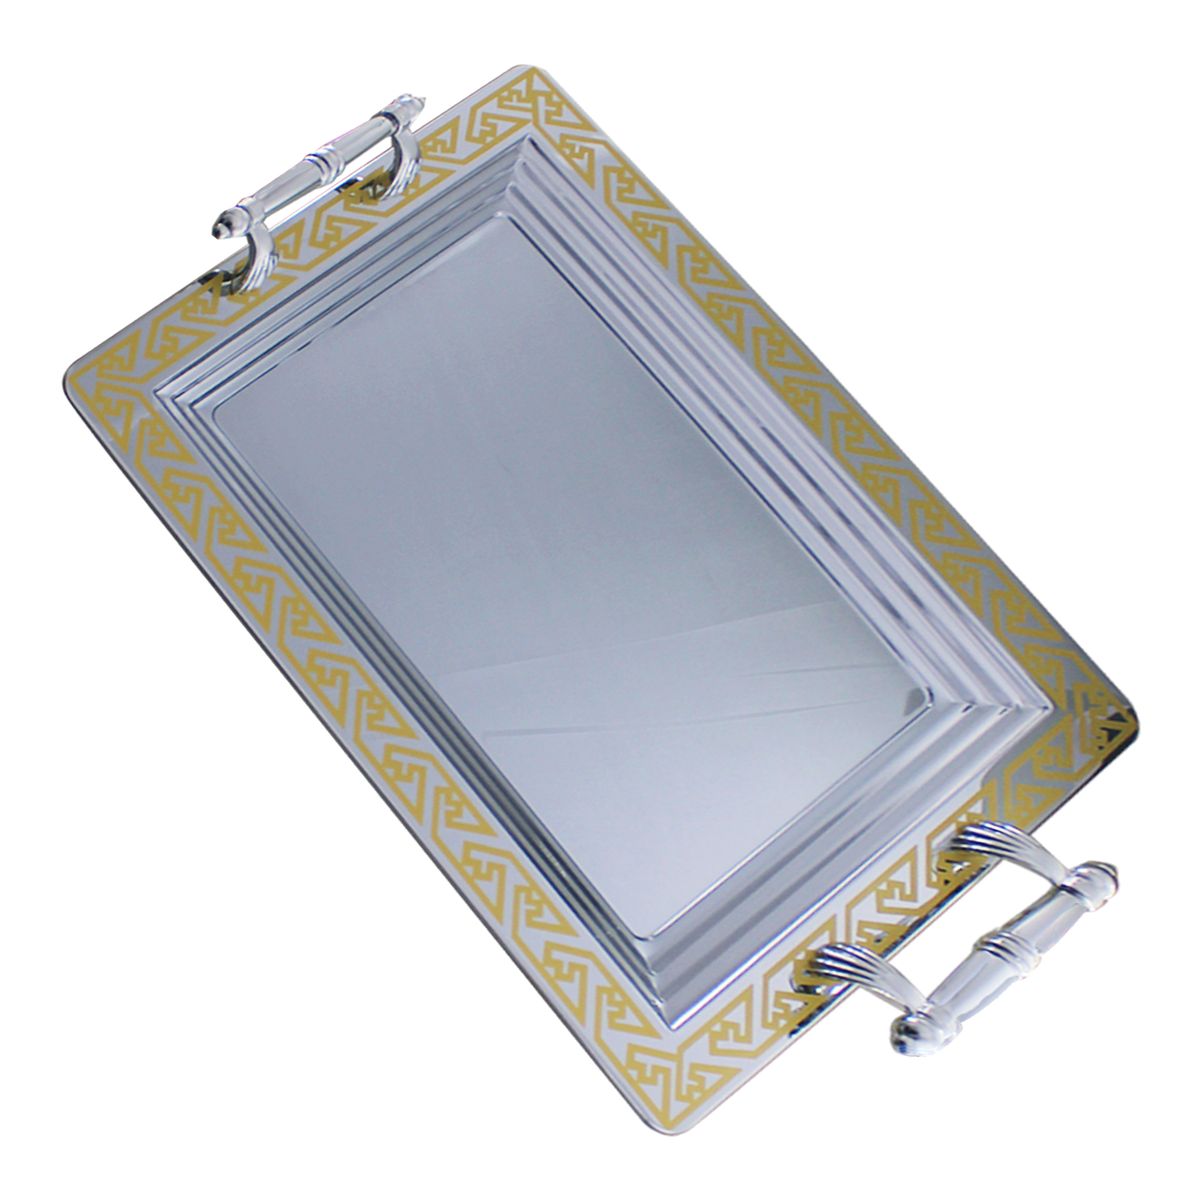 Stainless Steel Serving Tray with Decorative Border - 50 x 33cm